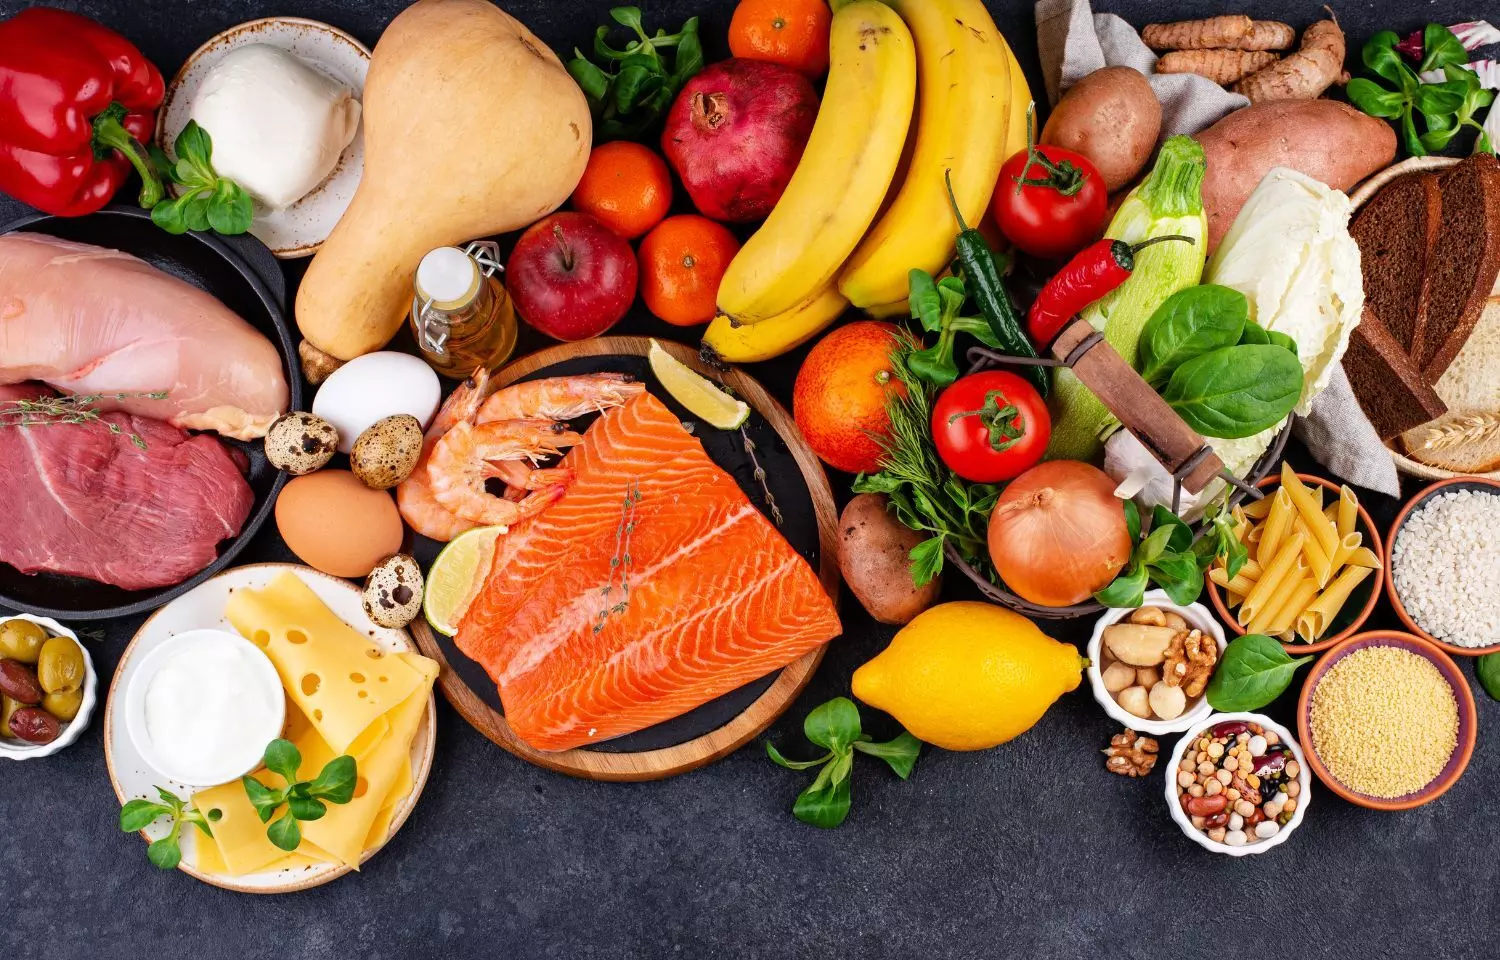 Mediterranean diet may reduce chance of frailty, finds study